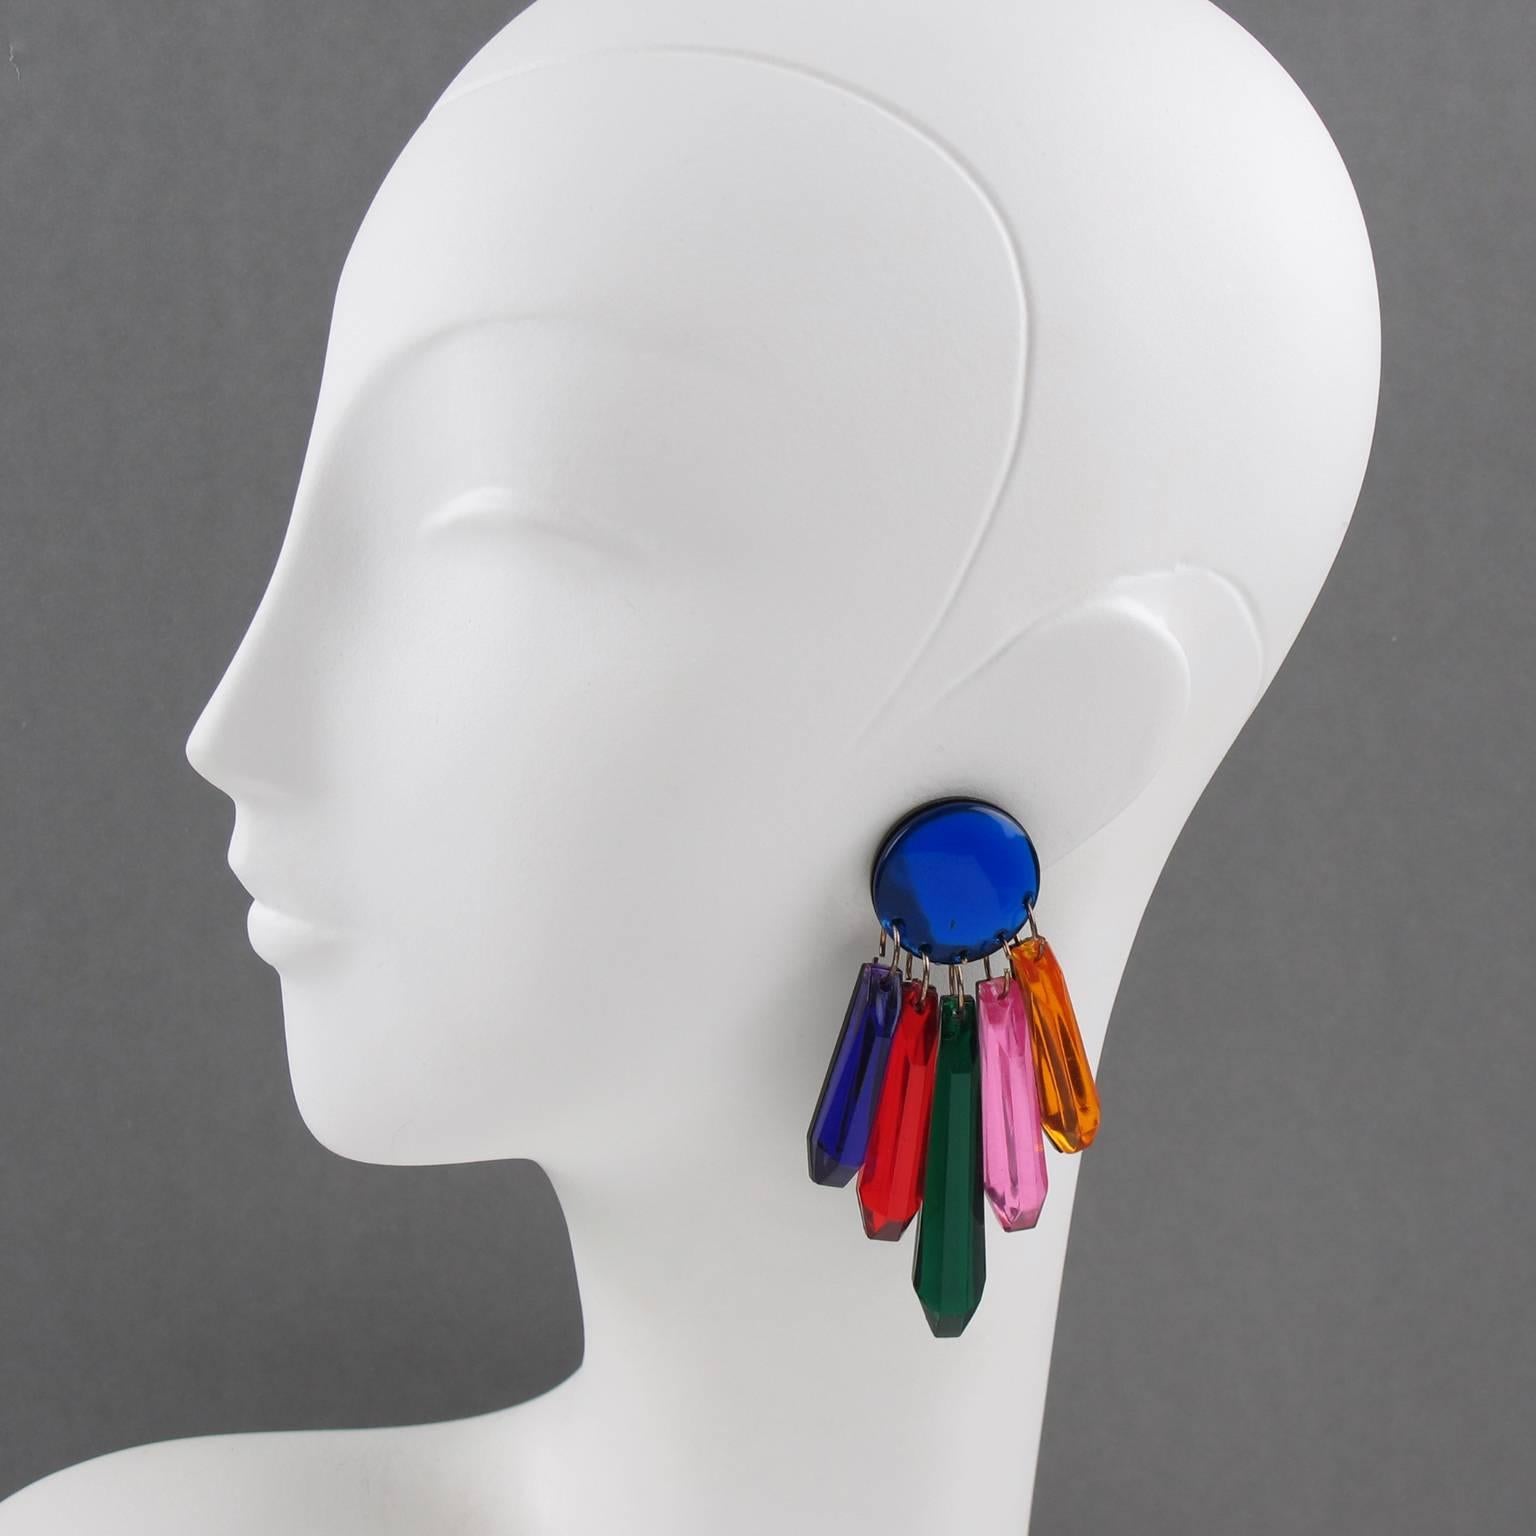 Stunning Italian designer studio oversized dangling chandelier Lucite clip on earrings. Huge dimensional shape with geometric dangling drop charms with mirror texture pattern. Assorted colors of cobalt blue, purple, bright red, forest green, pink